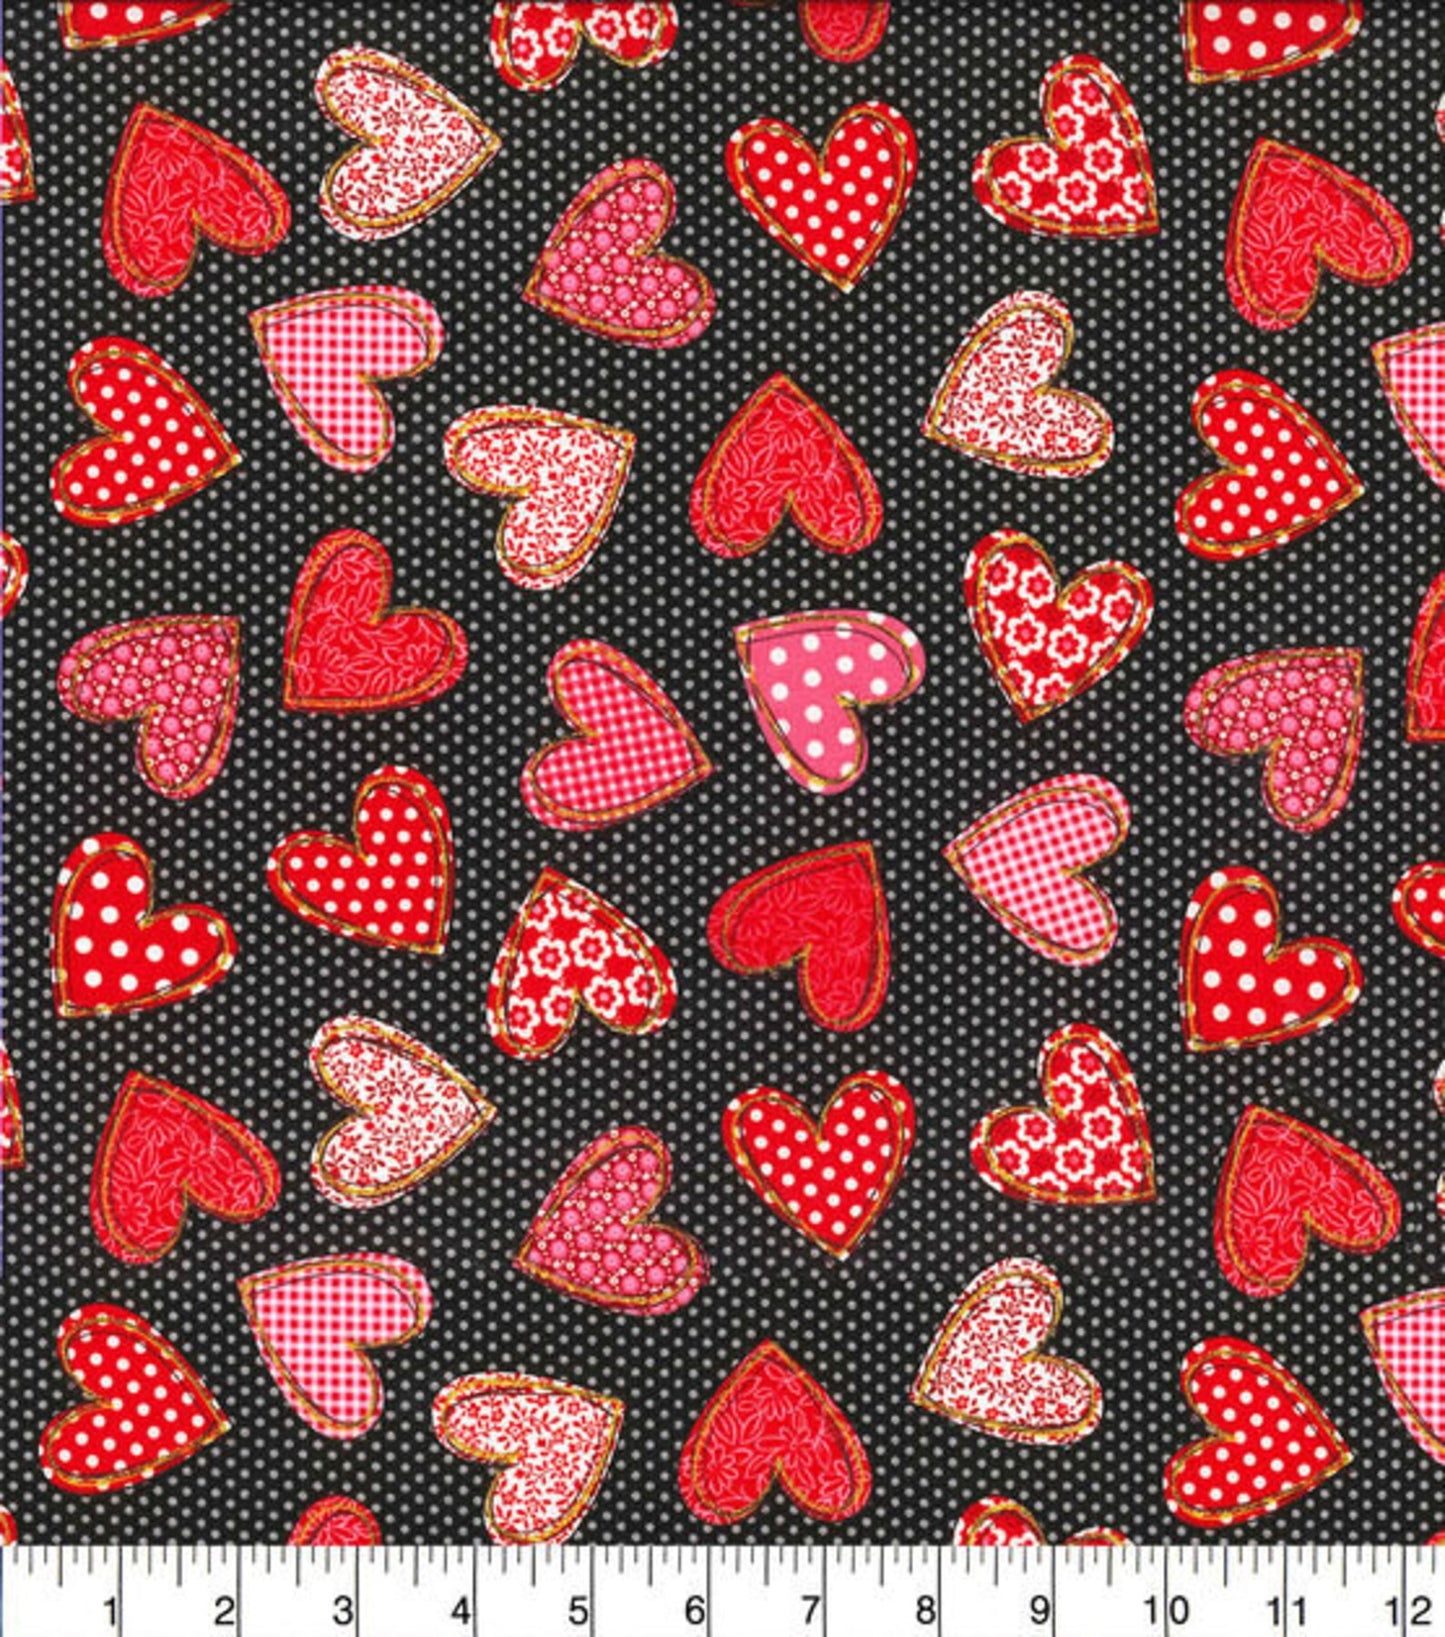 44 x 36 Valentine Glitter Hearts Toss Dots Fabric Traditions 100% Cotton